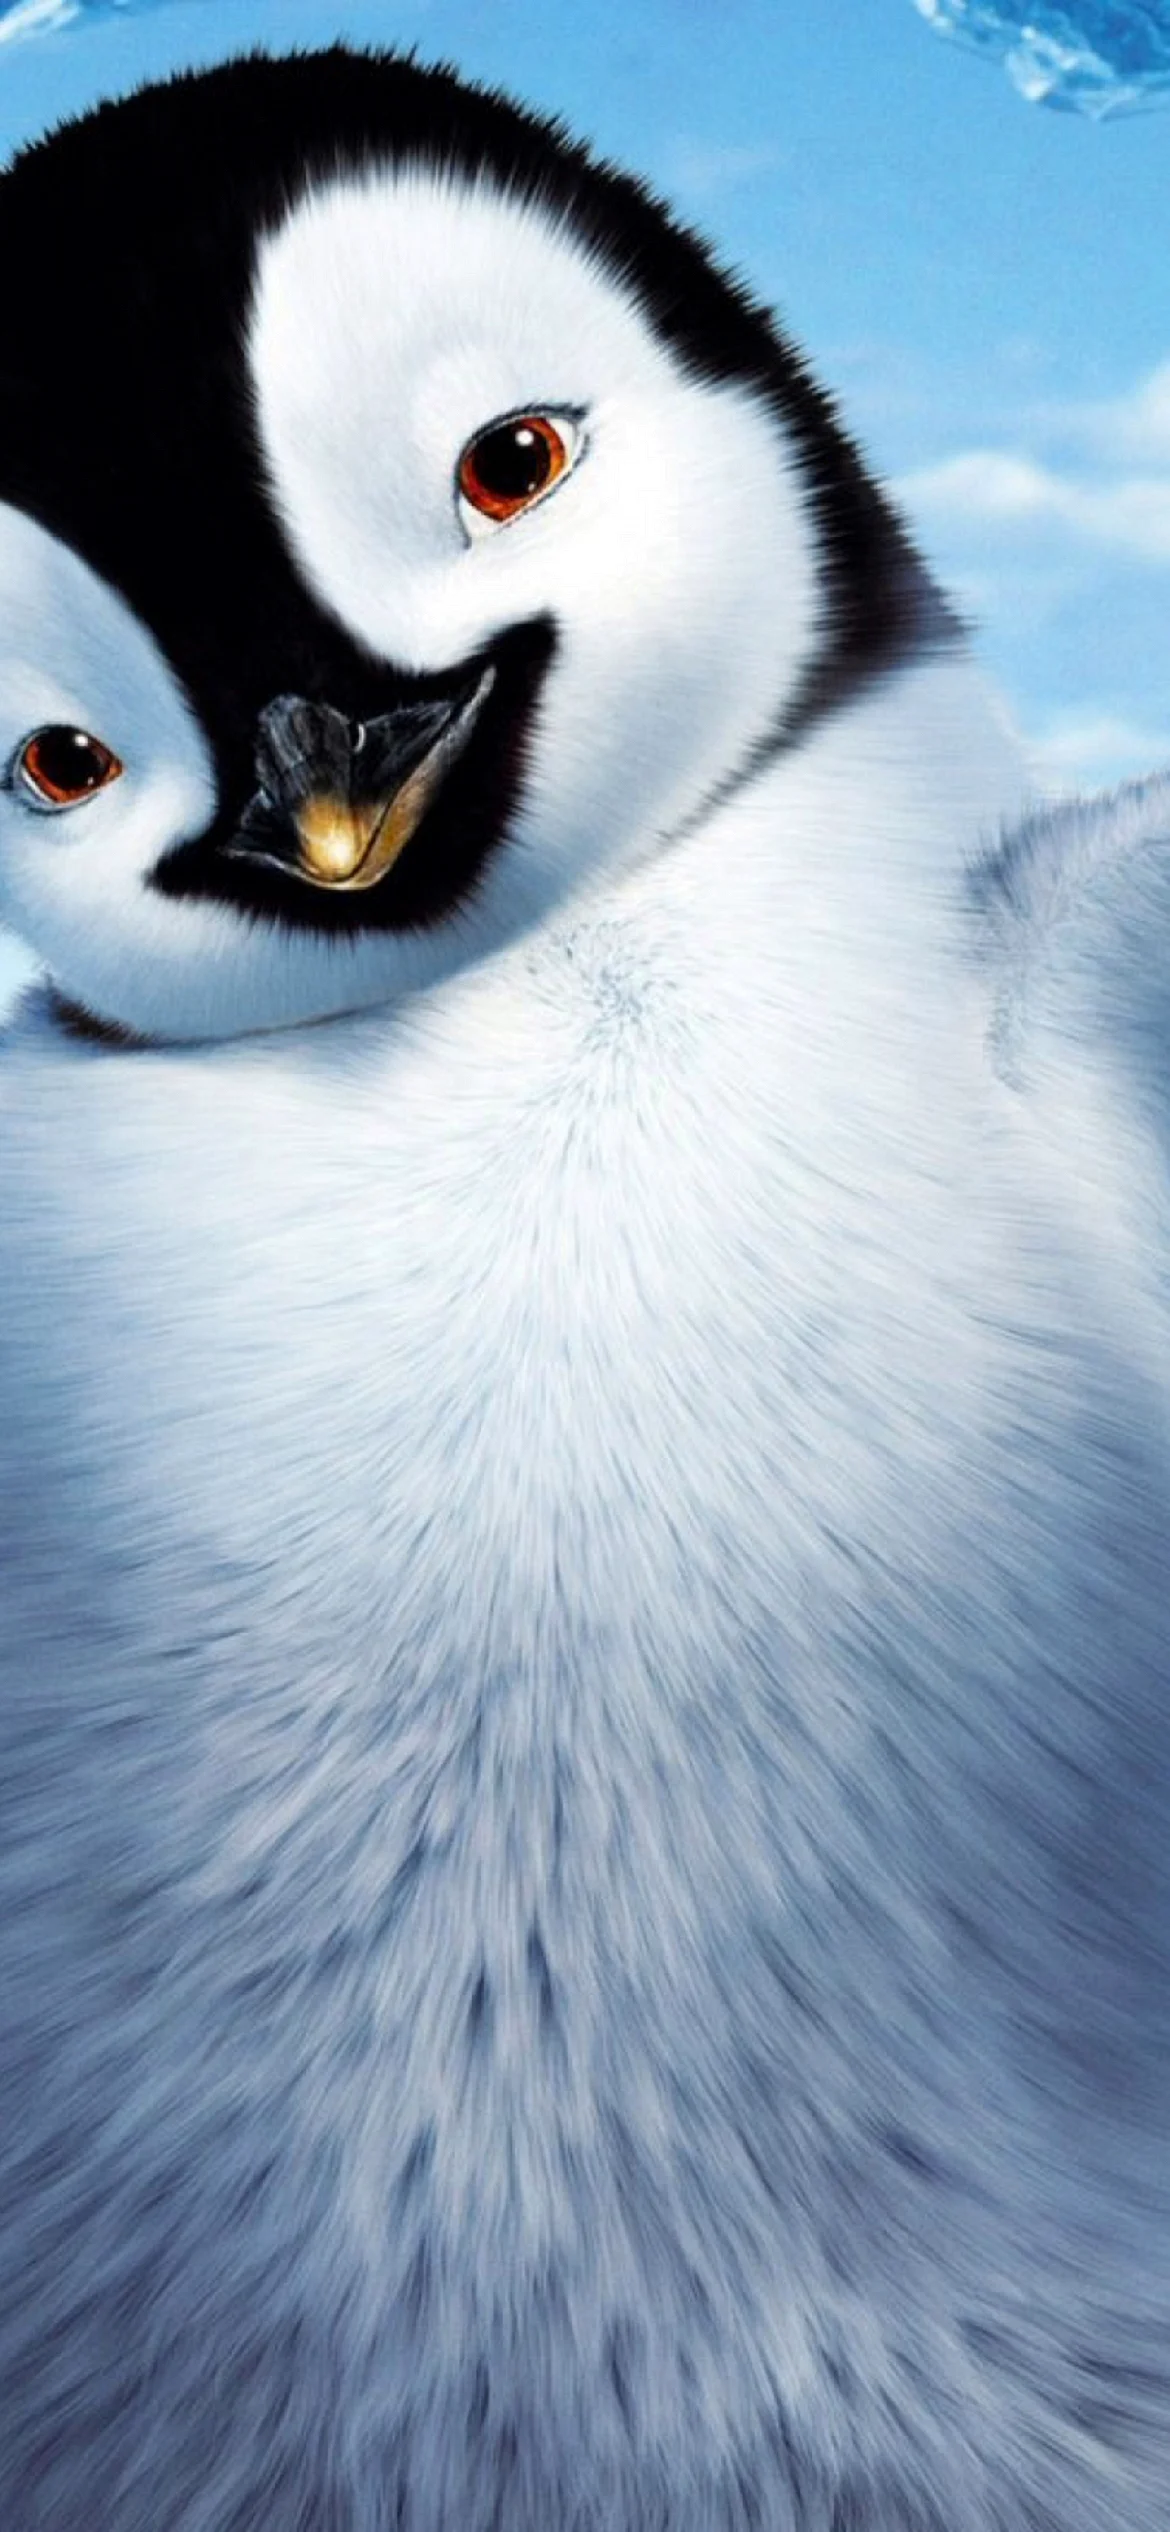 Happy Feet 2 Wallpaper for iPhone 12